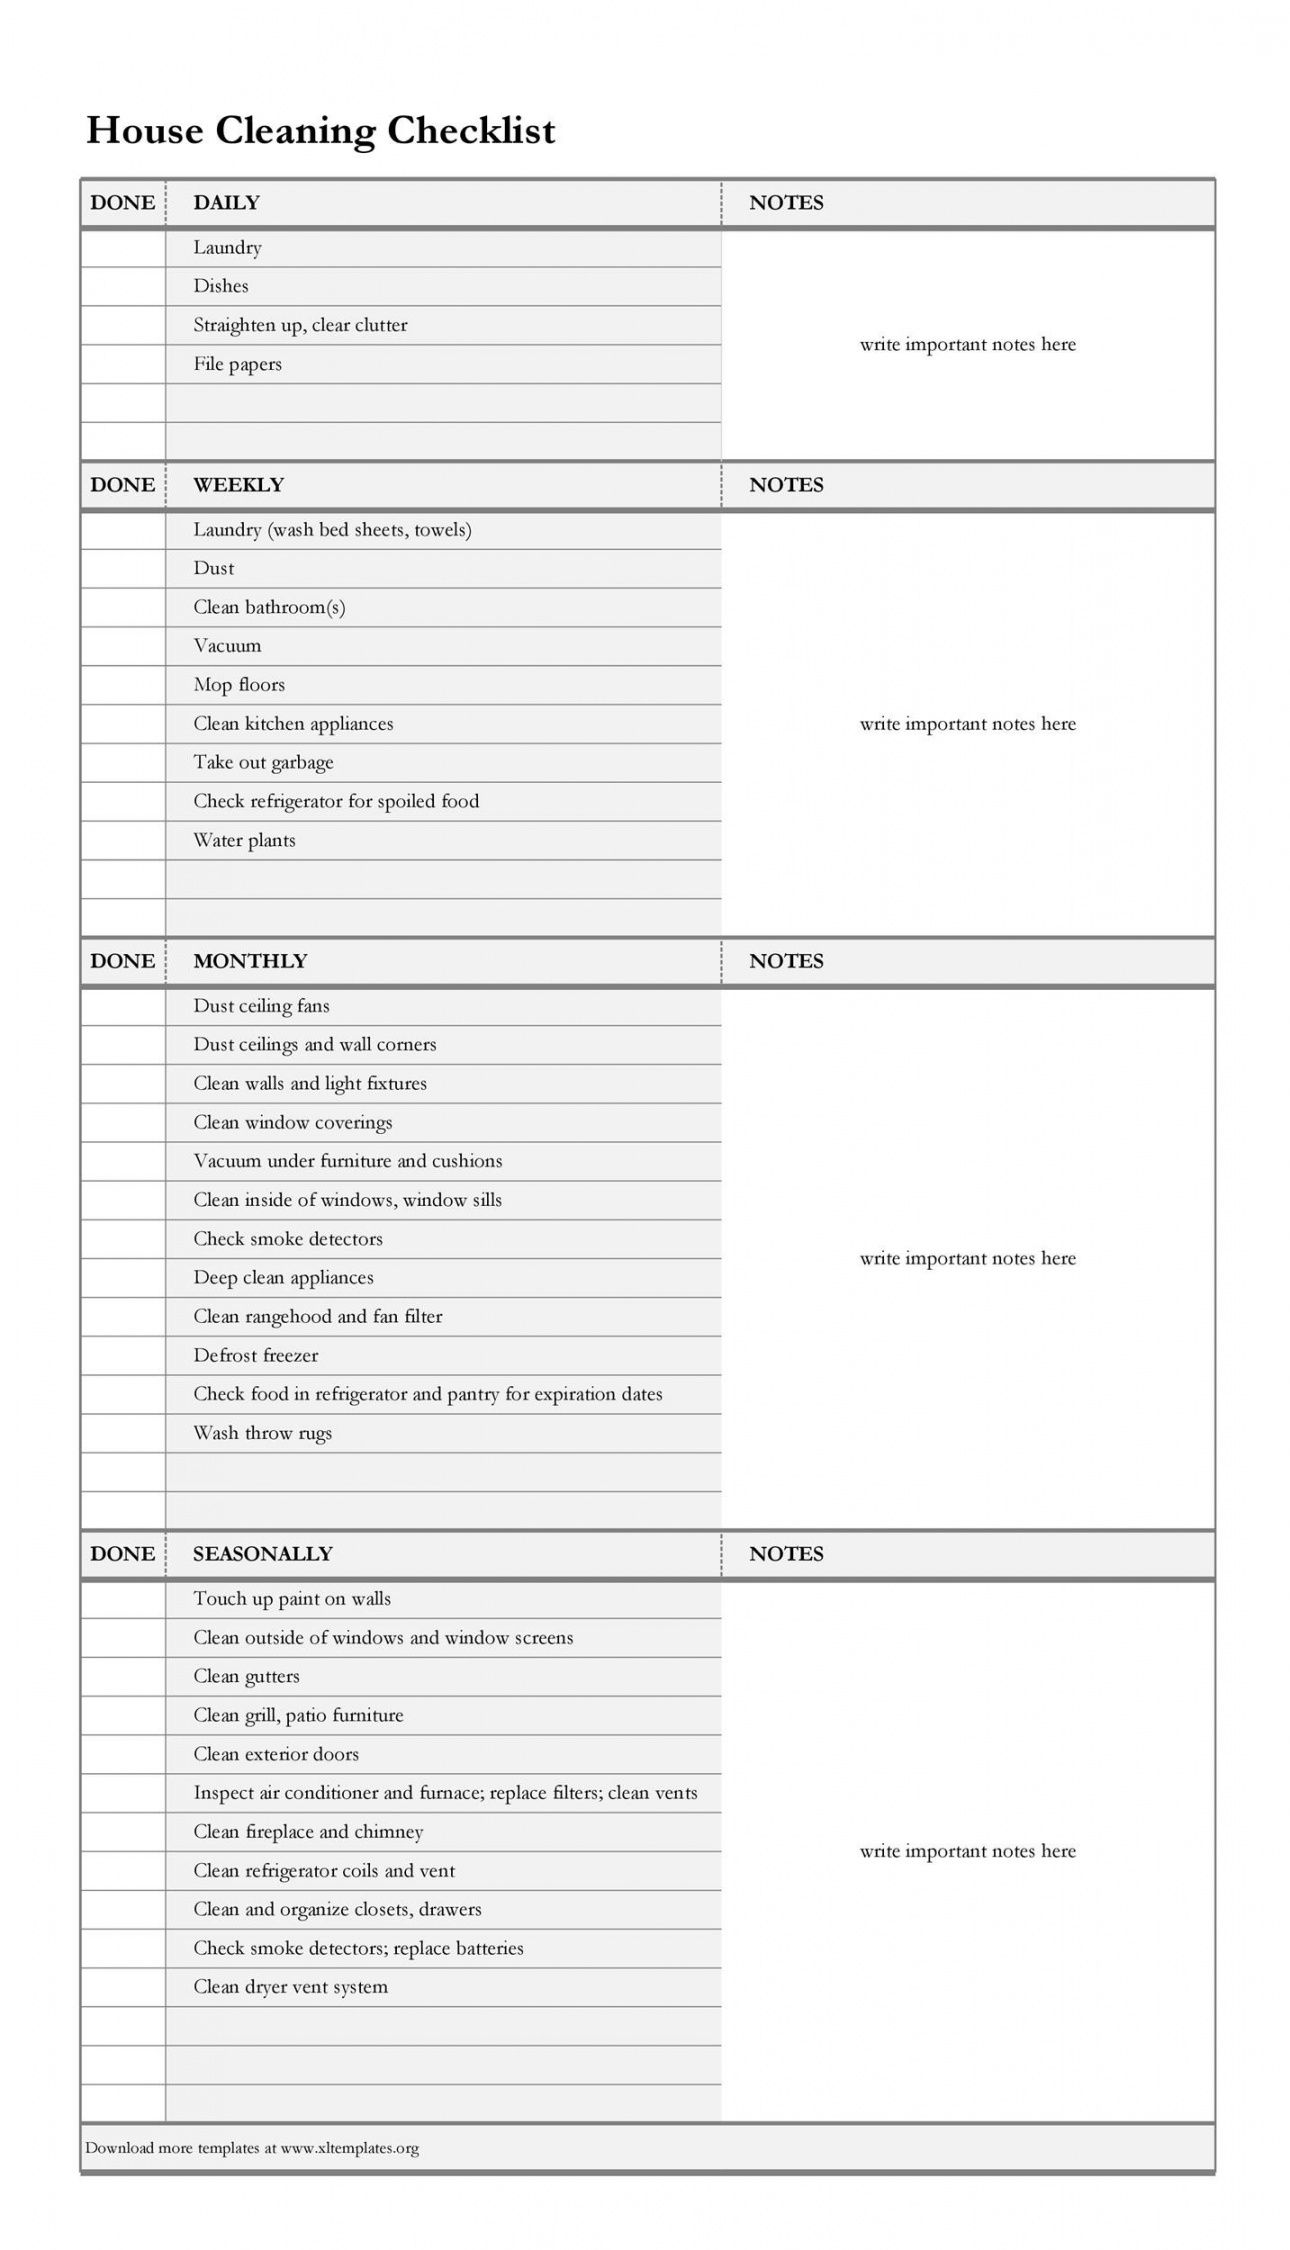 editable 40 printable house cleaning checklist templates ᐅ templatelab daily office cleaning checklist template samples